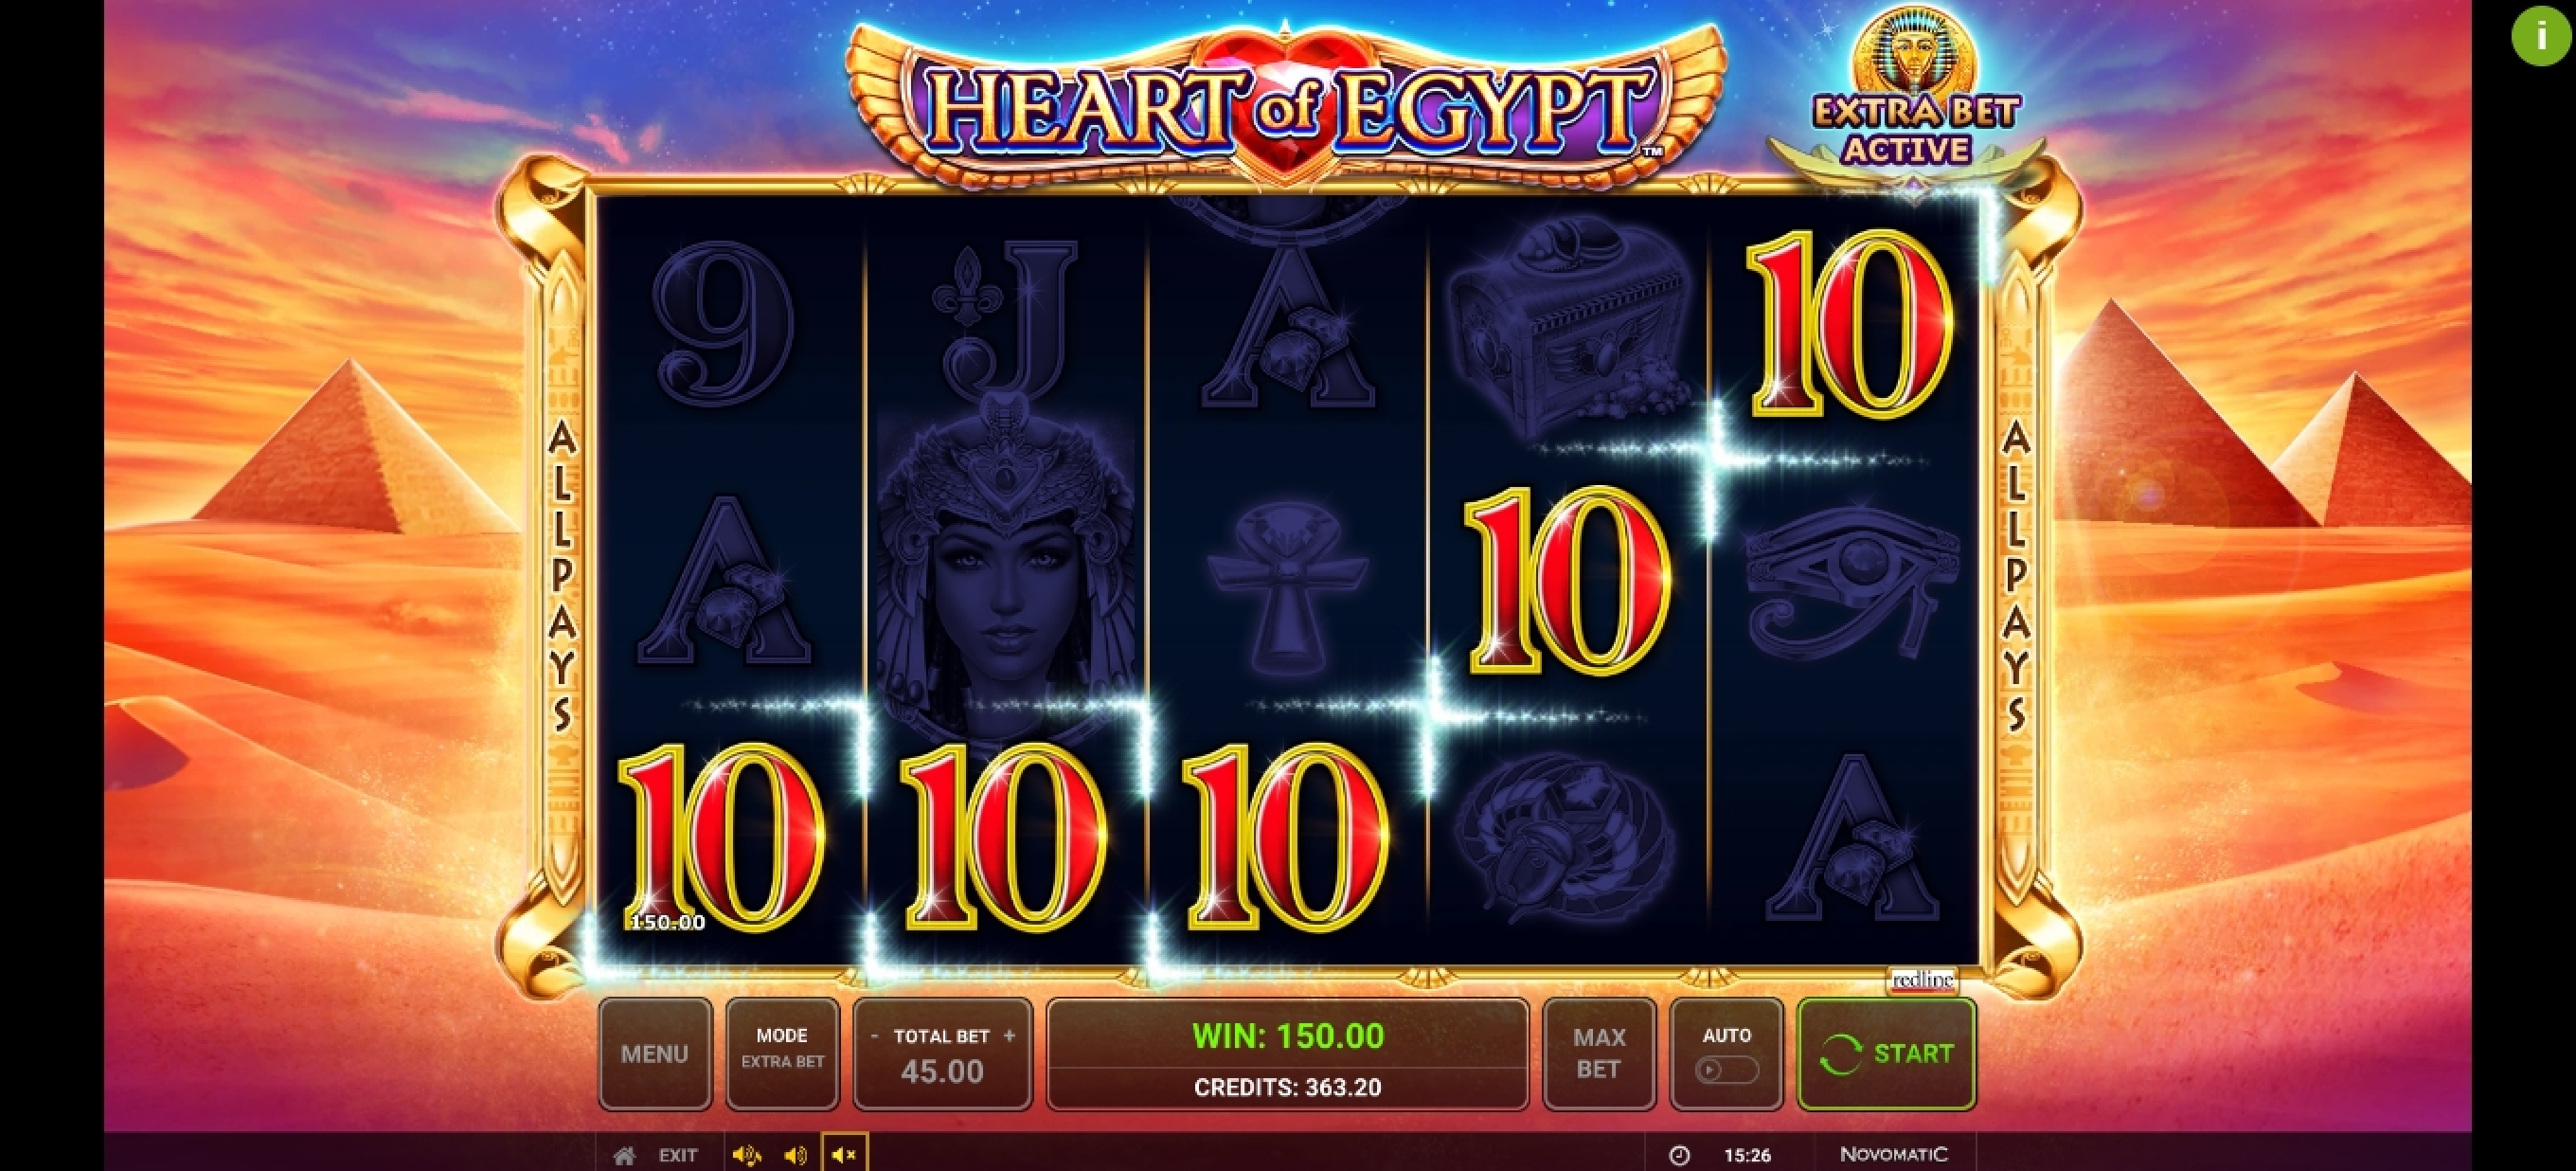 Win Money in Heart of Egypt Free Slot Game by Greentube